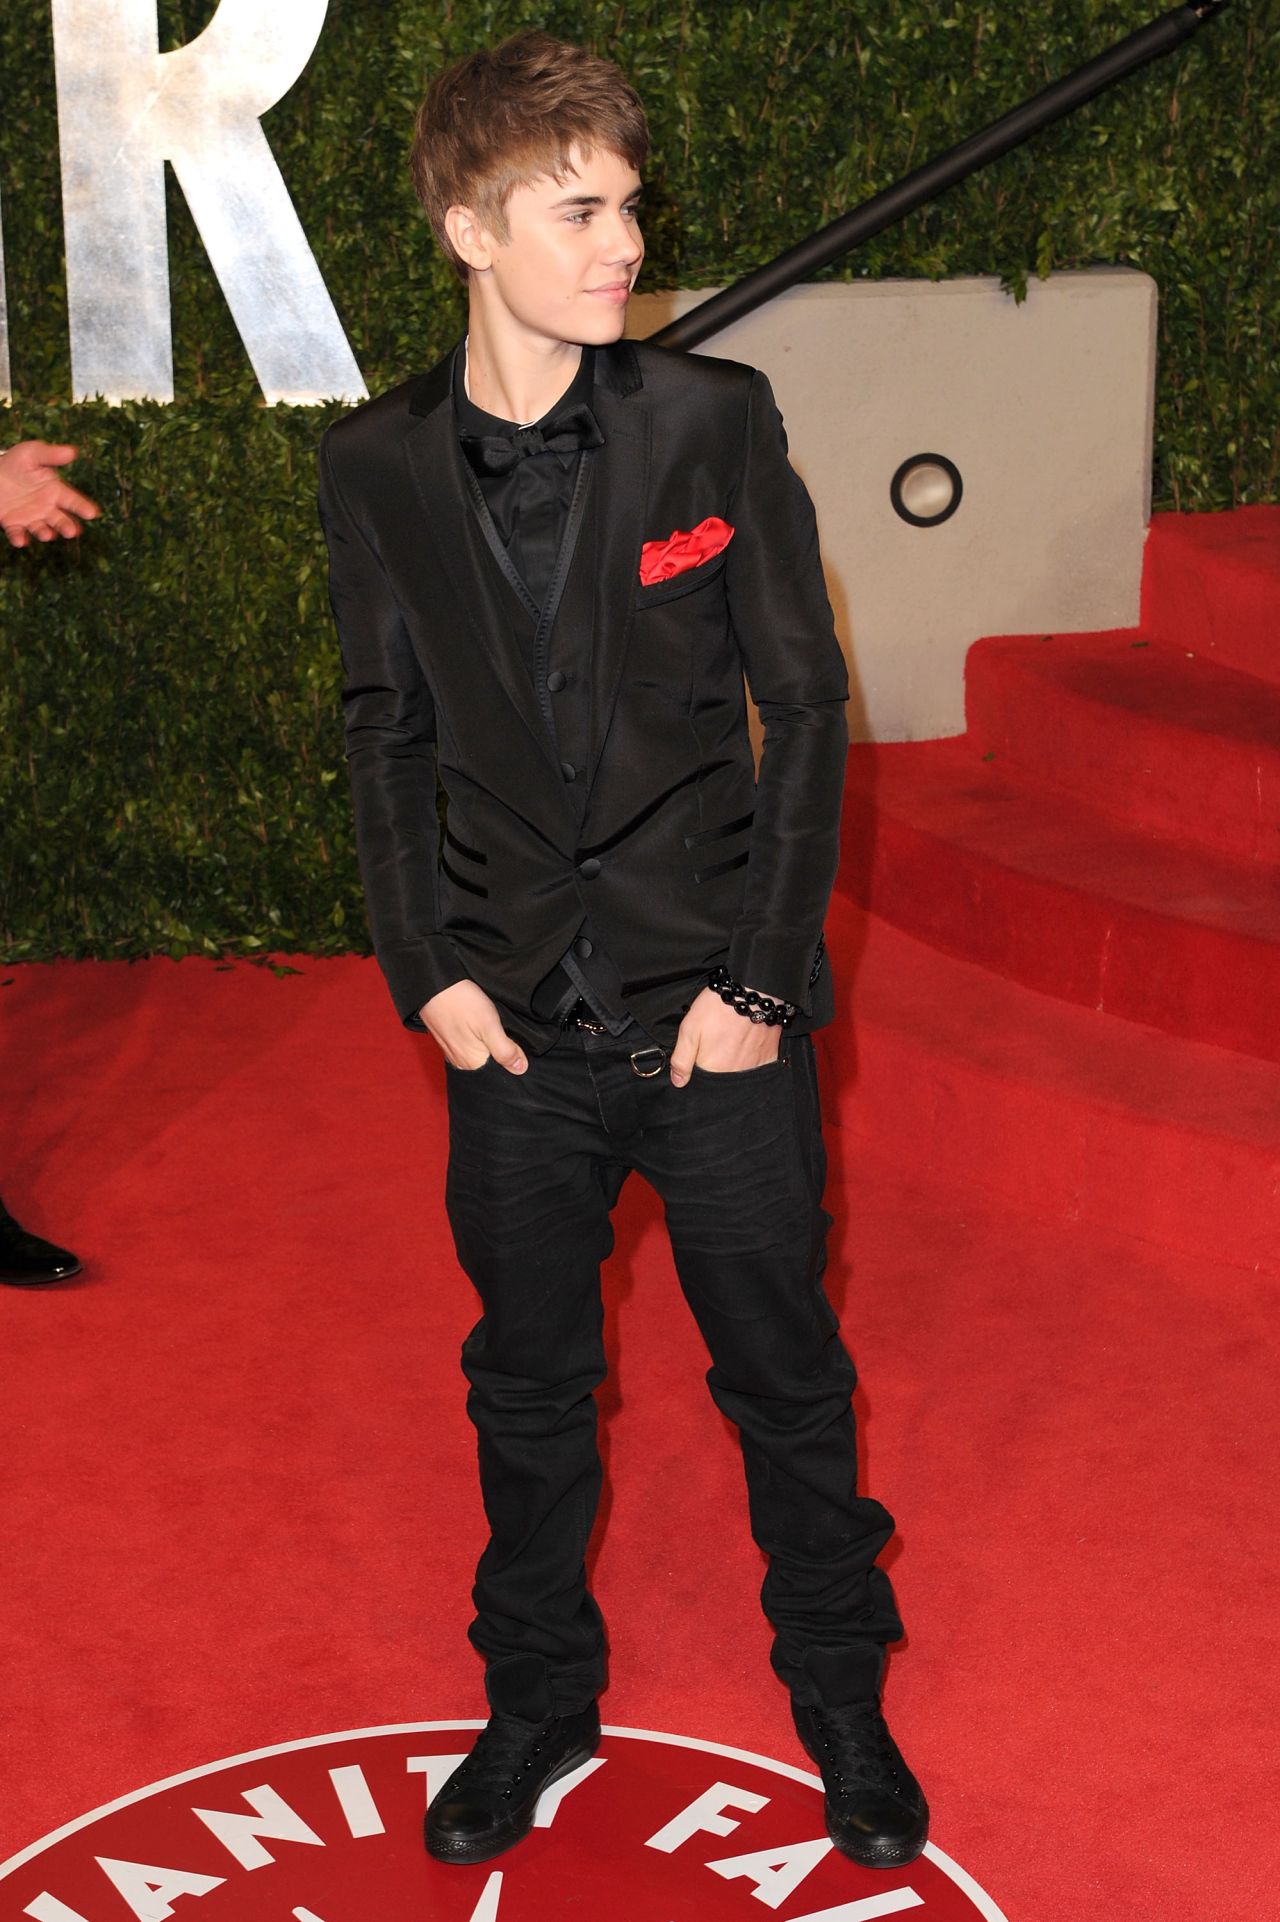 Without a doubt, Justin Bieber's popularity was boosted by his lush, eyelash-grazing bangs -- the kind that were soon found swooped across the foreheads of adolescent boys in nearly every middle school in America around 2010. But <a href="http://marquee.blogs.cnn.com/2011/02/22/justin-bieber-debuts-mature-haircut/" target="_blank">in February 2011, Bieber practically</a> broke the Internet when he revealed a shorter, spikier and -- to him at least -- "more mature" 'do.